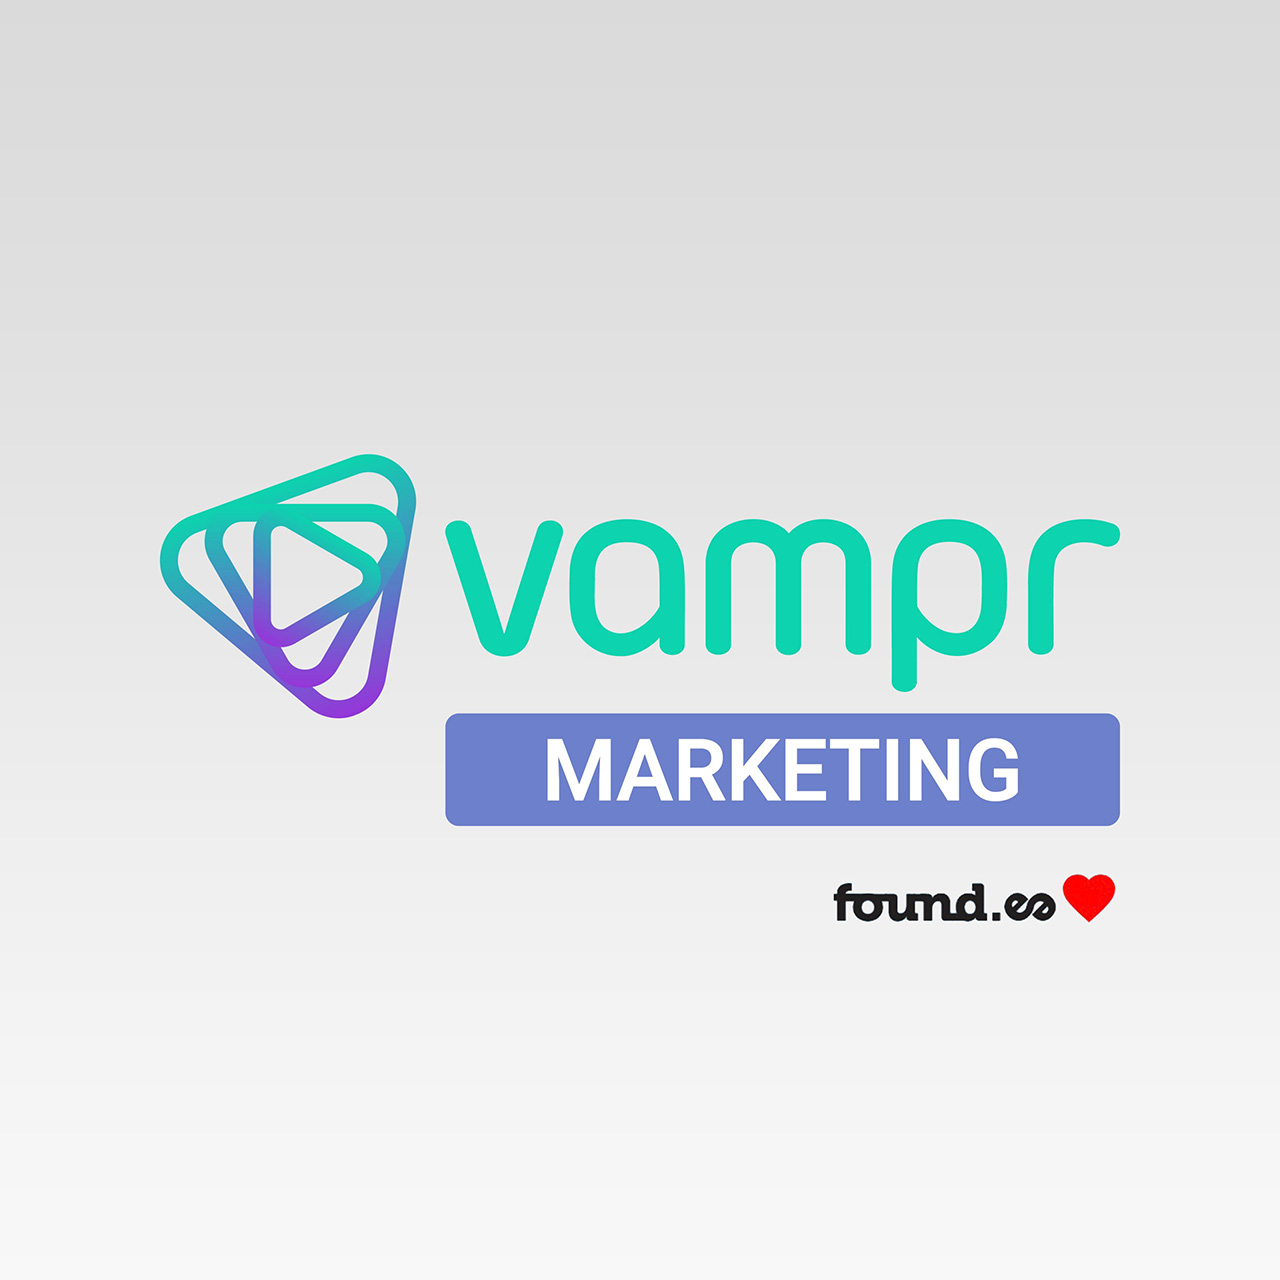 Vampr Marketing logo with found.ee and a love heart